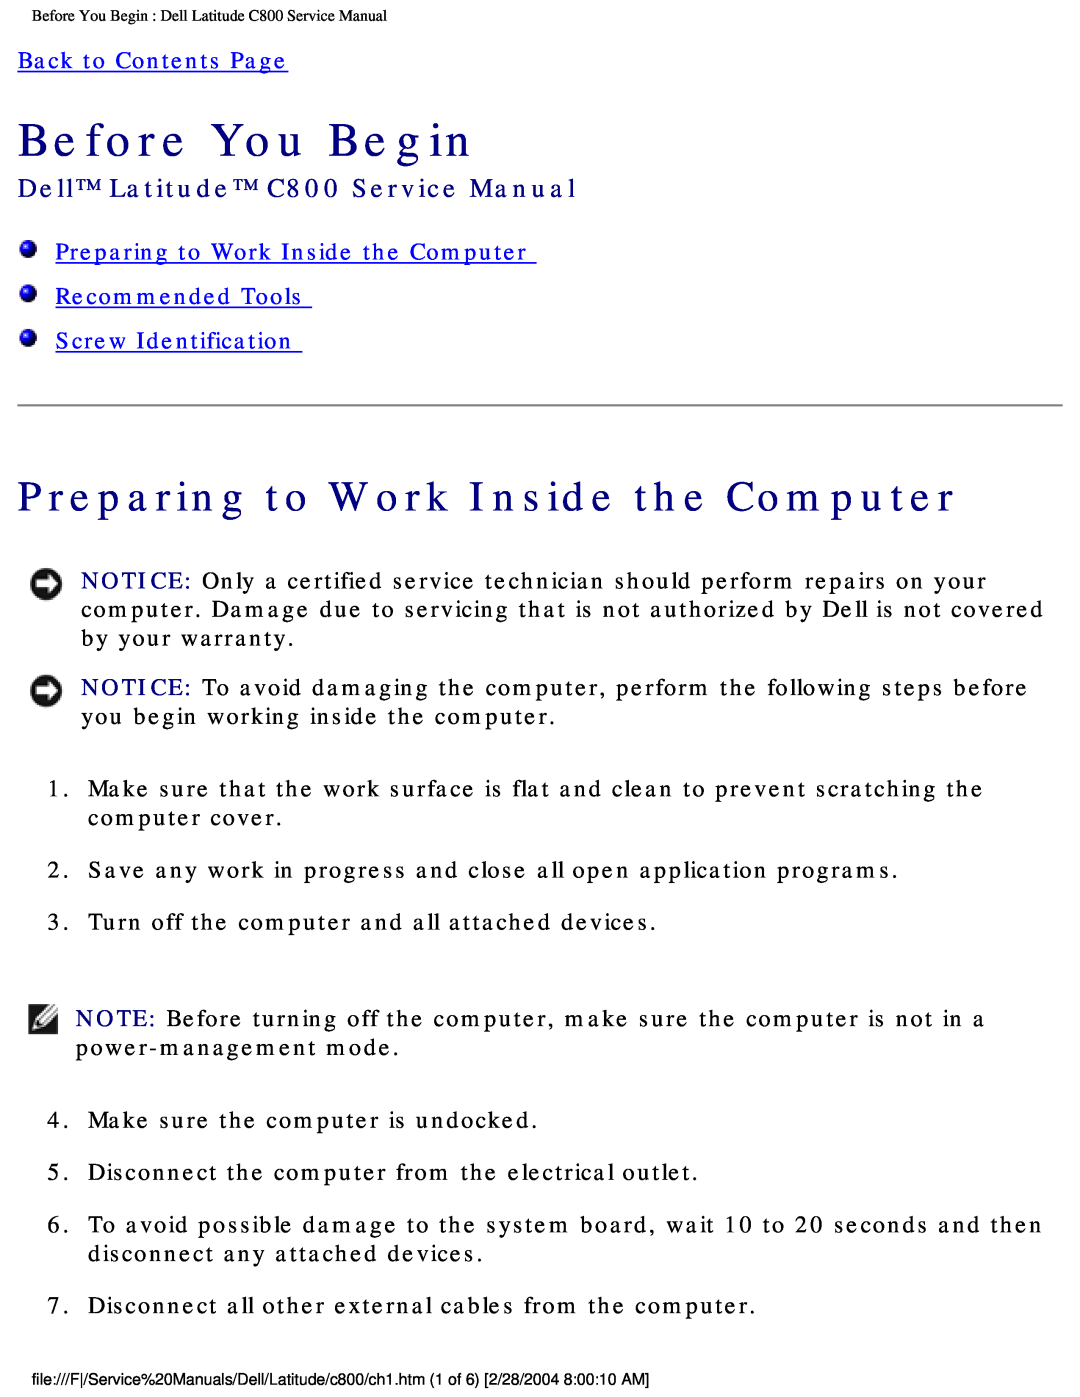 Dell service manual Before You Begin, Preparing to Work Inside the Computer, Dell Latitude C800 Service Manual 